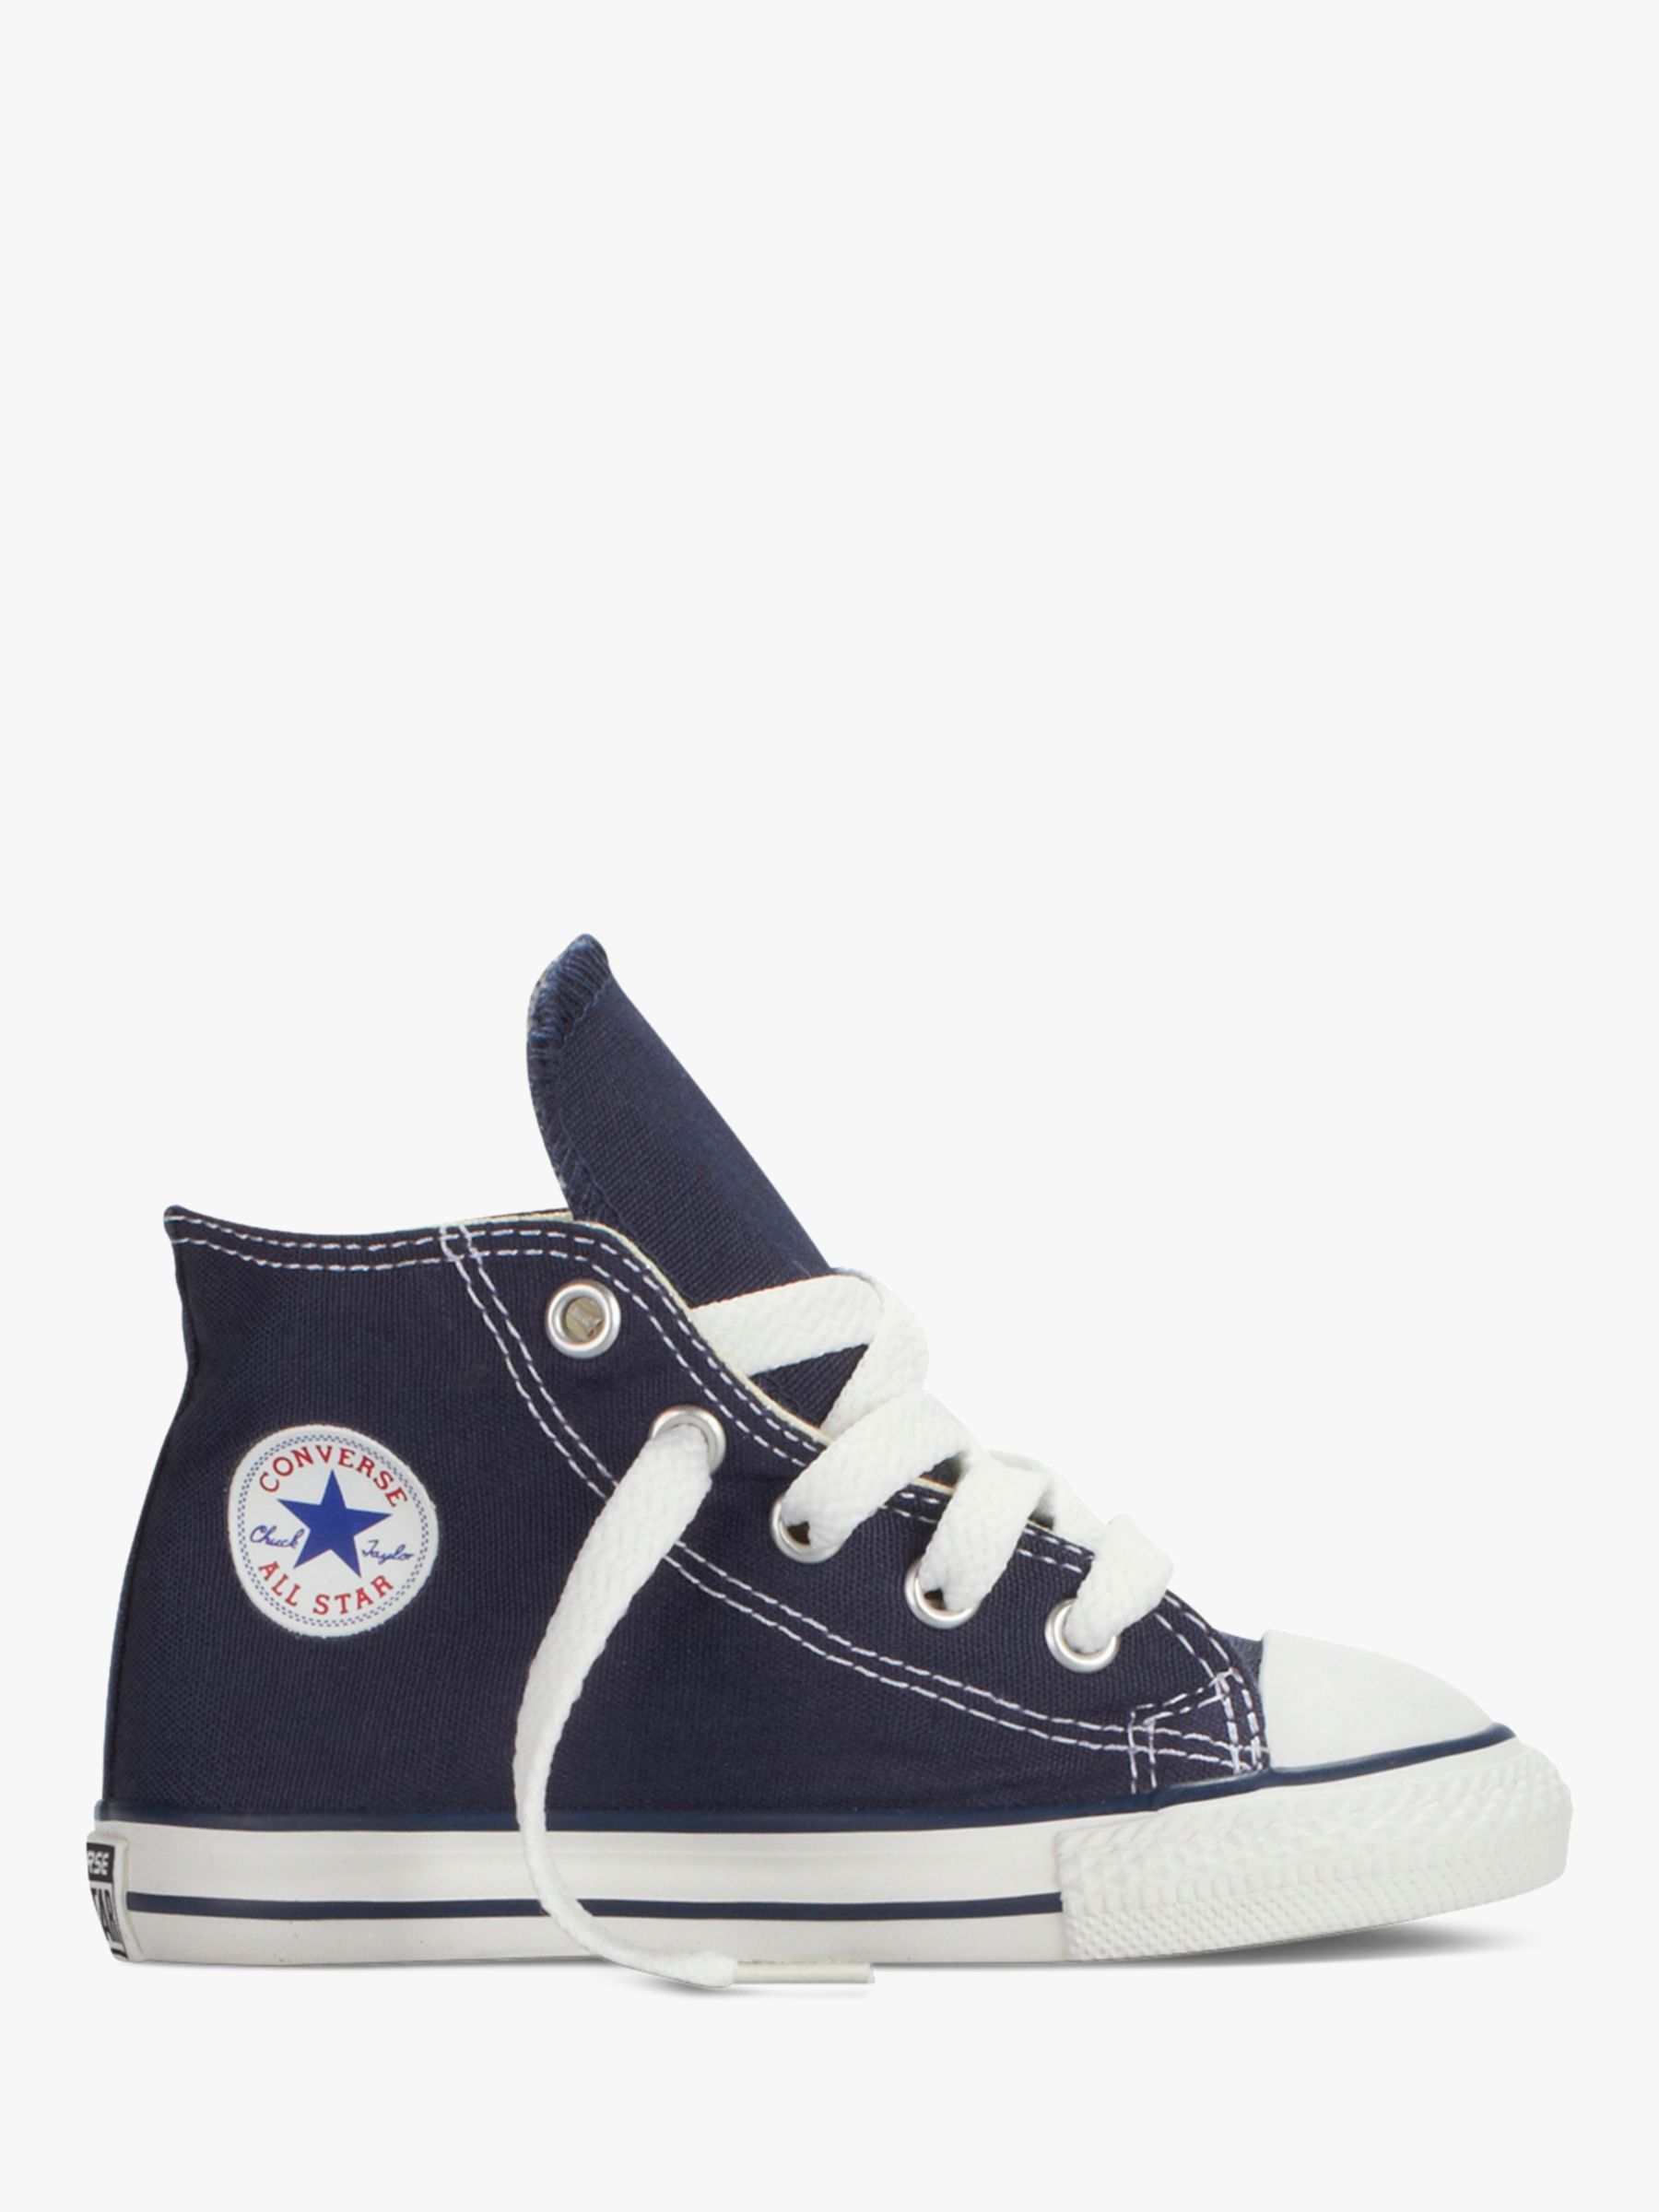 Converse All Star Core-Hi Trainers, Navy, Size 2 Adult